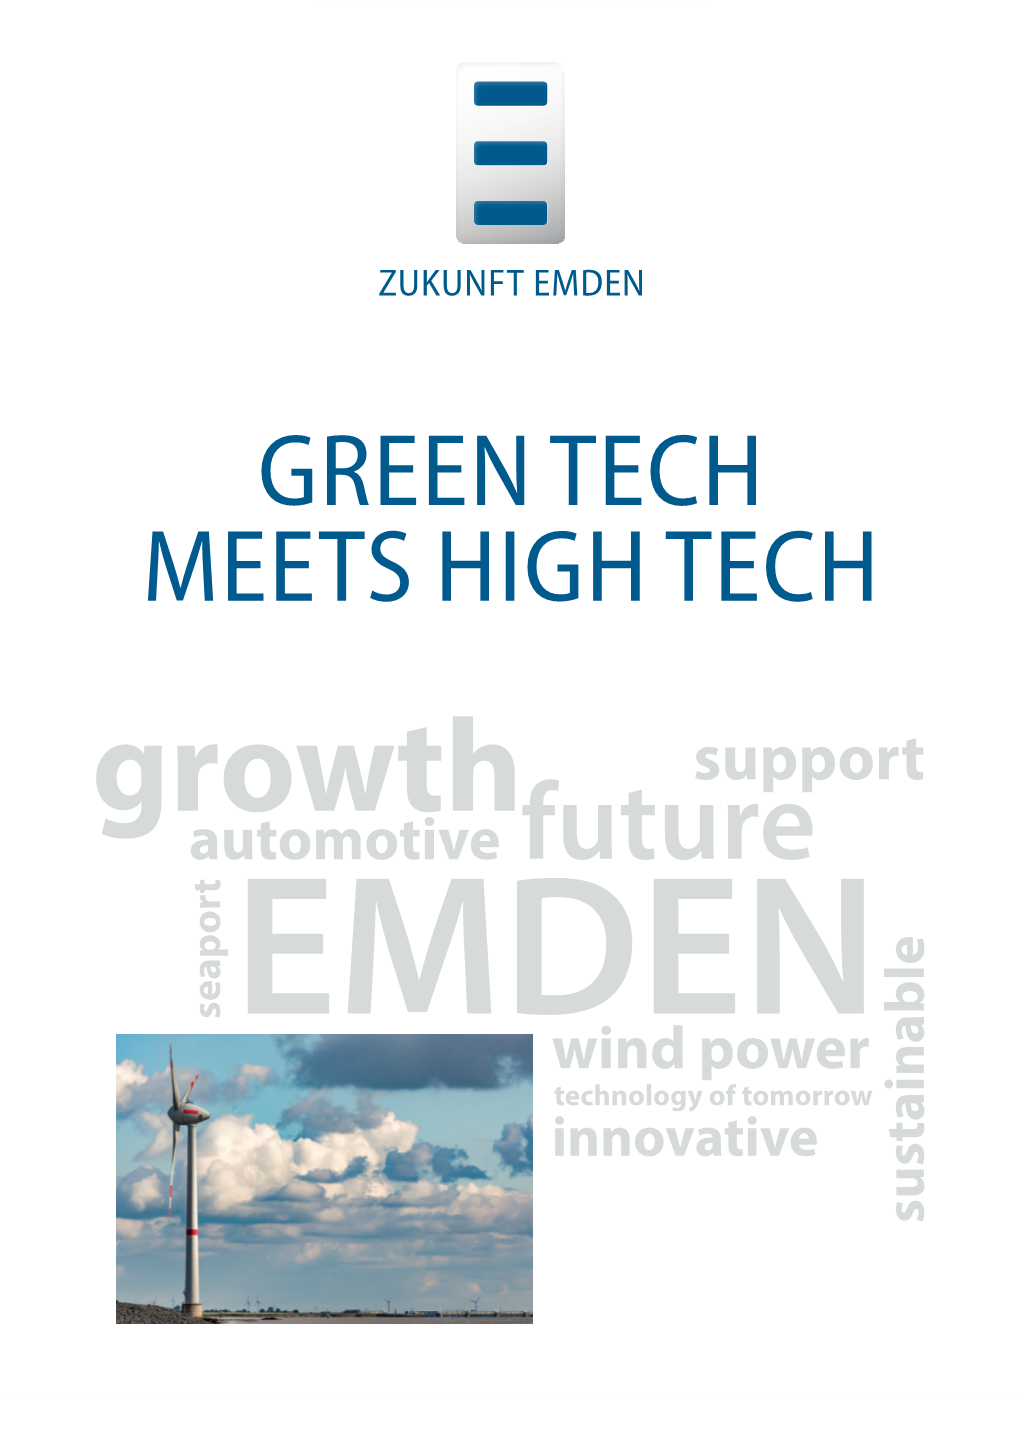 Future Seaport Emdenwind Power Technology of Tomorrow Innovative Sustainable Economic Hub in the City of Emden Green Energy Meets IDEAL LOCATION in High-Tech Industry